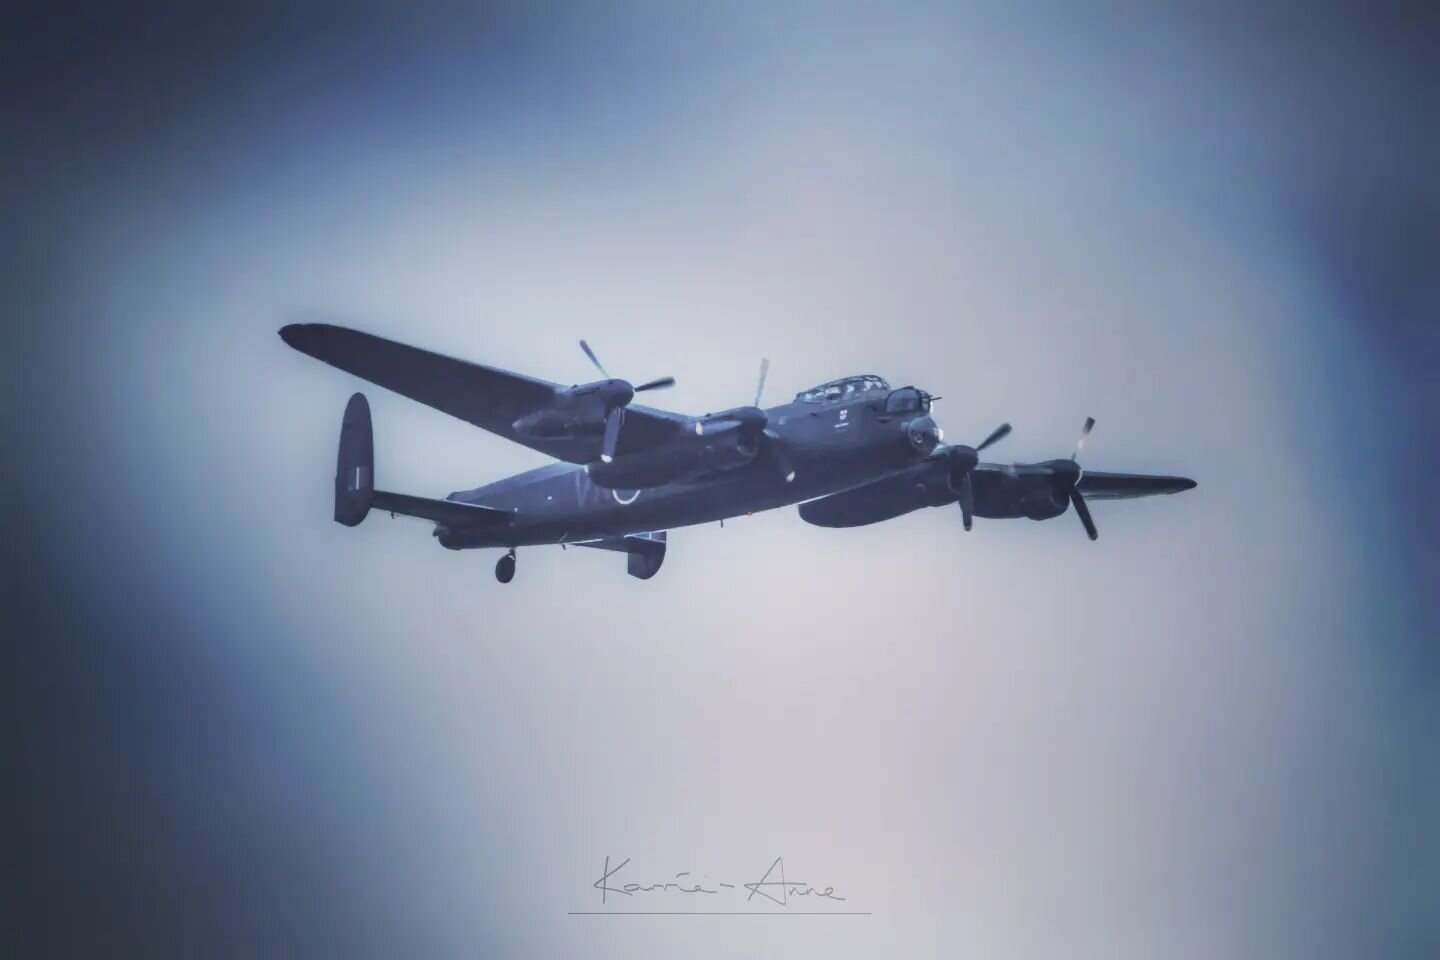 Lancaster bomber flyover. Lincolnshire was witness to quite the treat this evening for the Dambuster 80th Anniversary. 

I love my job!

#aircraftphotography #lancasterbomber #lincolnshirephotographer